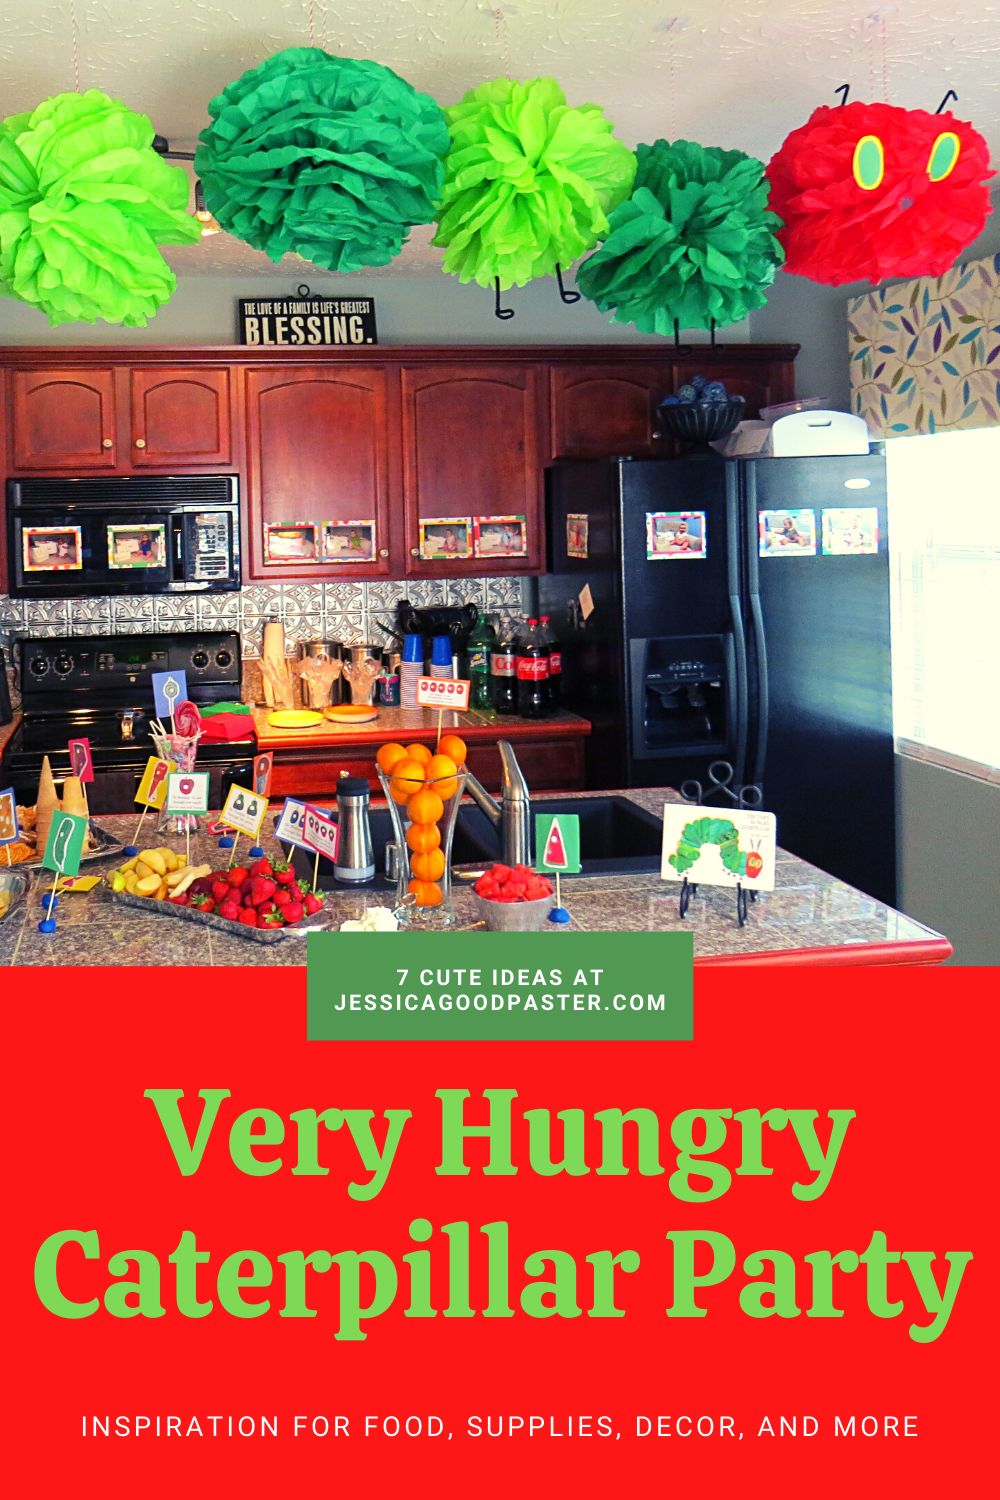 7 Cute Ideas for a Very Hungry Caterpillar Party | Have an amazing Very Hungry Caterpillar birthday party with these ideas for food, decorations, supplies, cakes, outfits, invitations, gifts, and more. Perfect for a first birthday and for years beyond. You'll love these easy and DIY tips. 